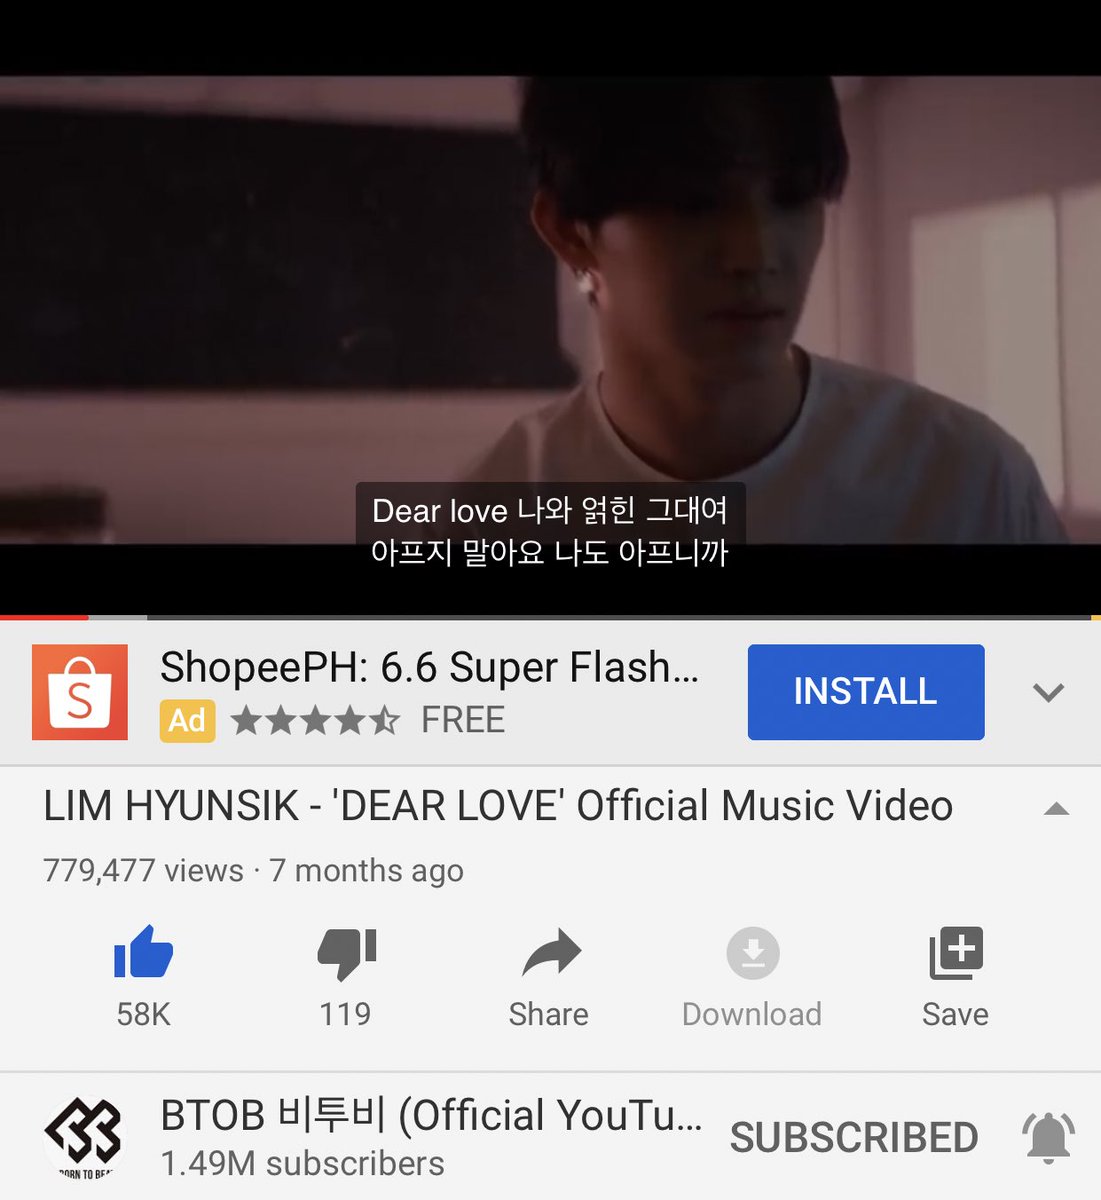 Dear Love view count streaming thread 27MAY2020 12:43PM KST779,477